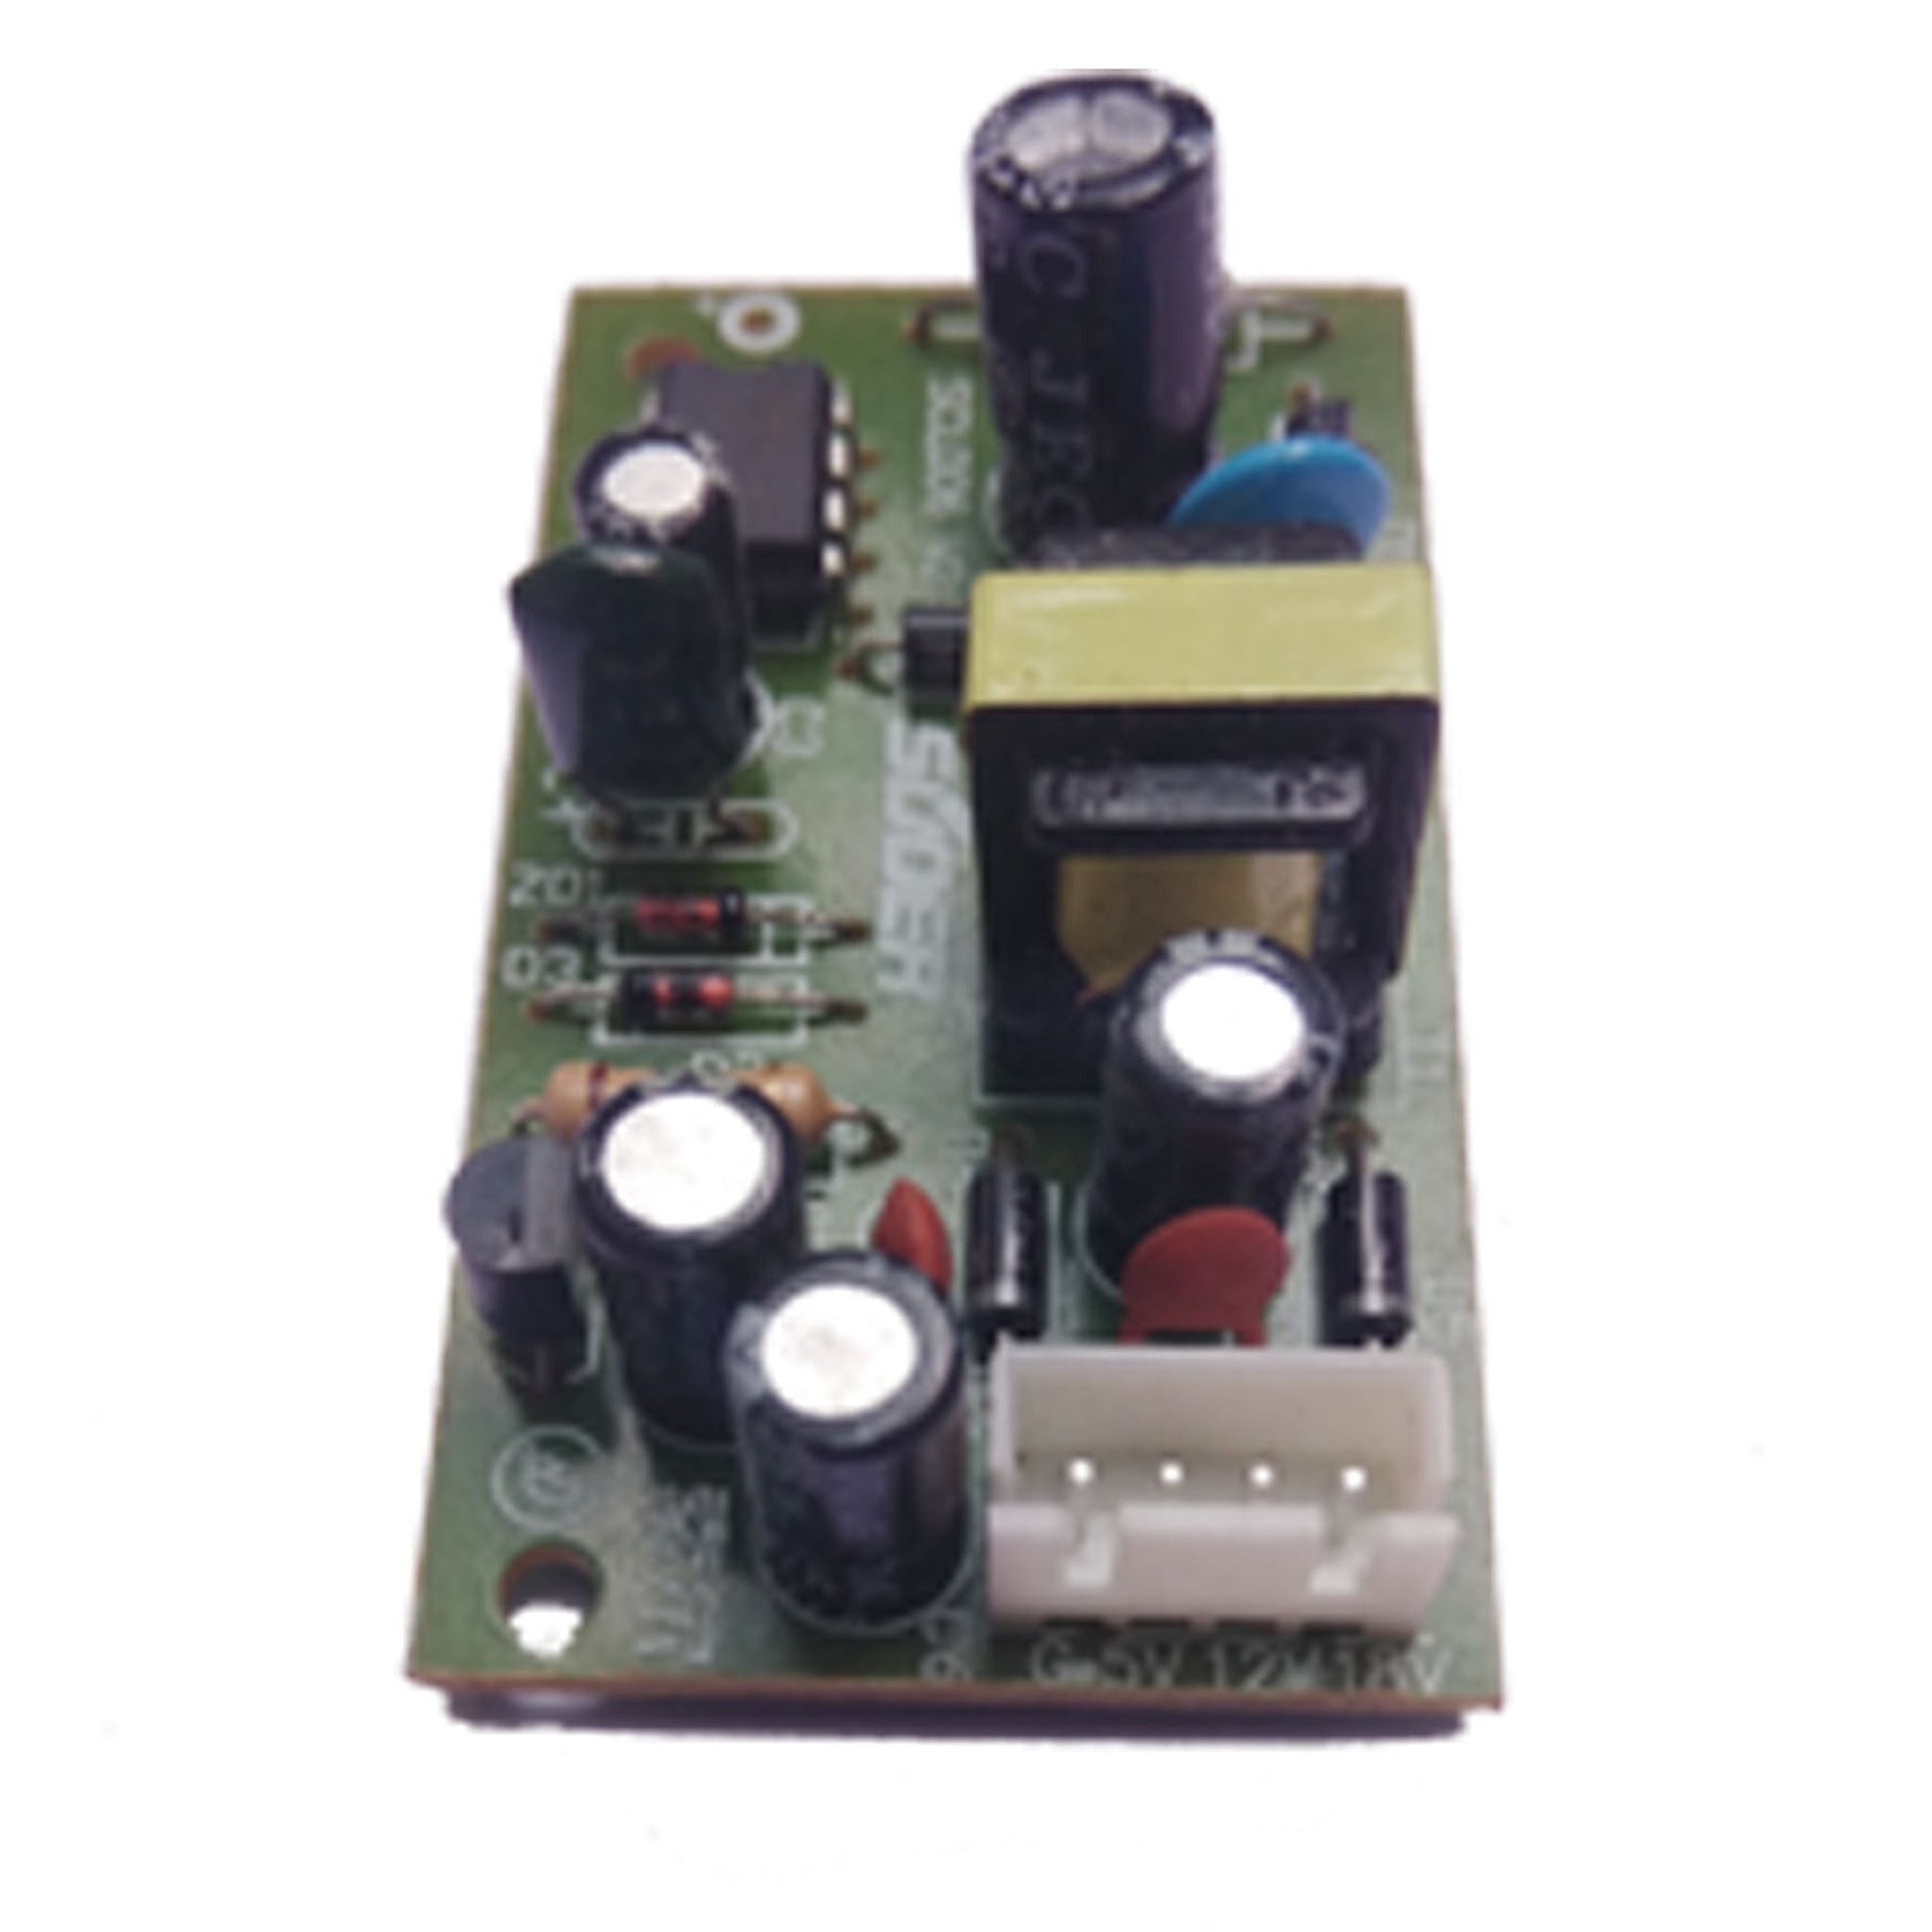 5V/12V/18V Universal Induction Cooker Switch Switching Power Supply Module Board - Faritha